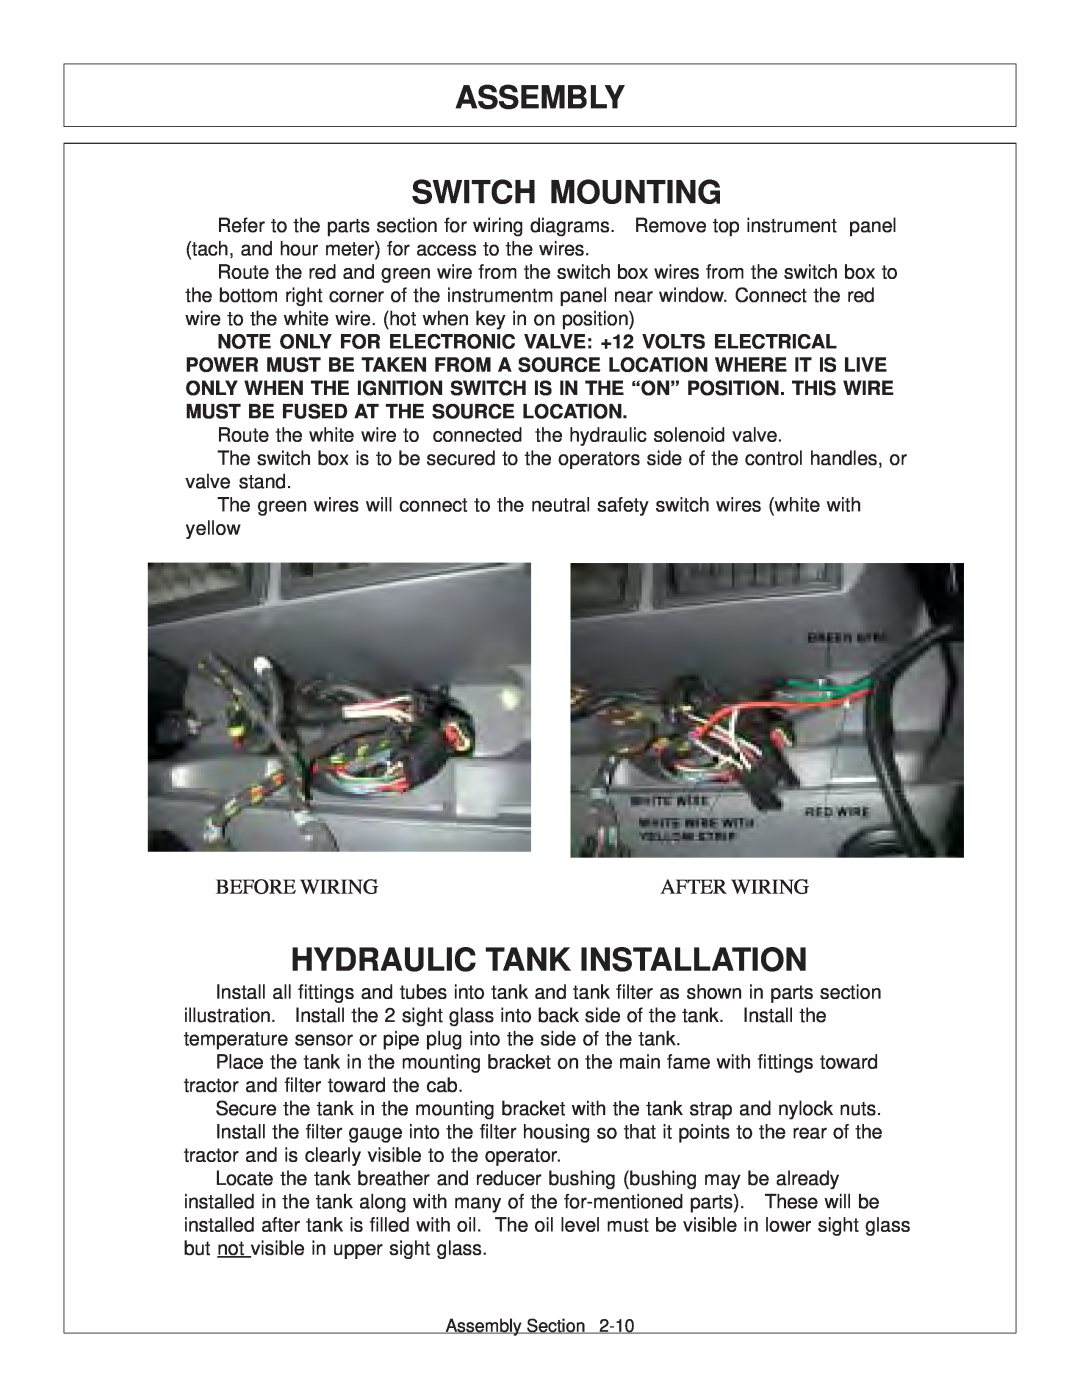 Tiger Products Co., Ltd 6020009 manual Assembly Switch Mounting, Hydraulic Tank Installation, Before Wiring, After Wiring 